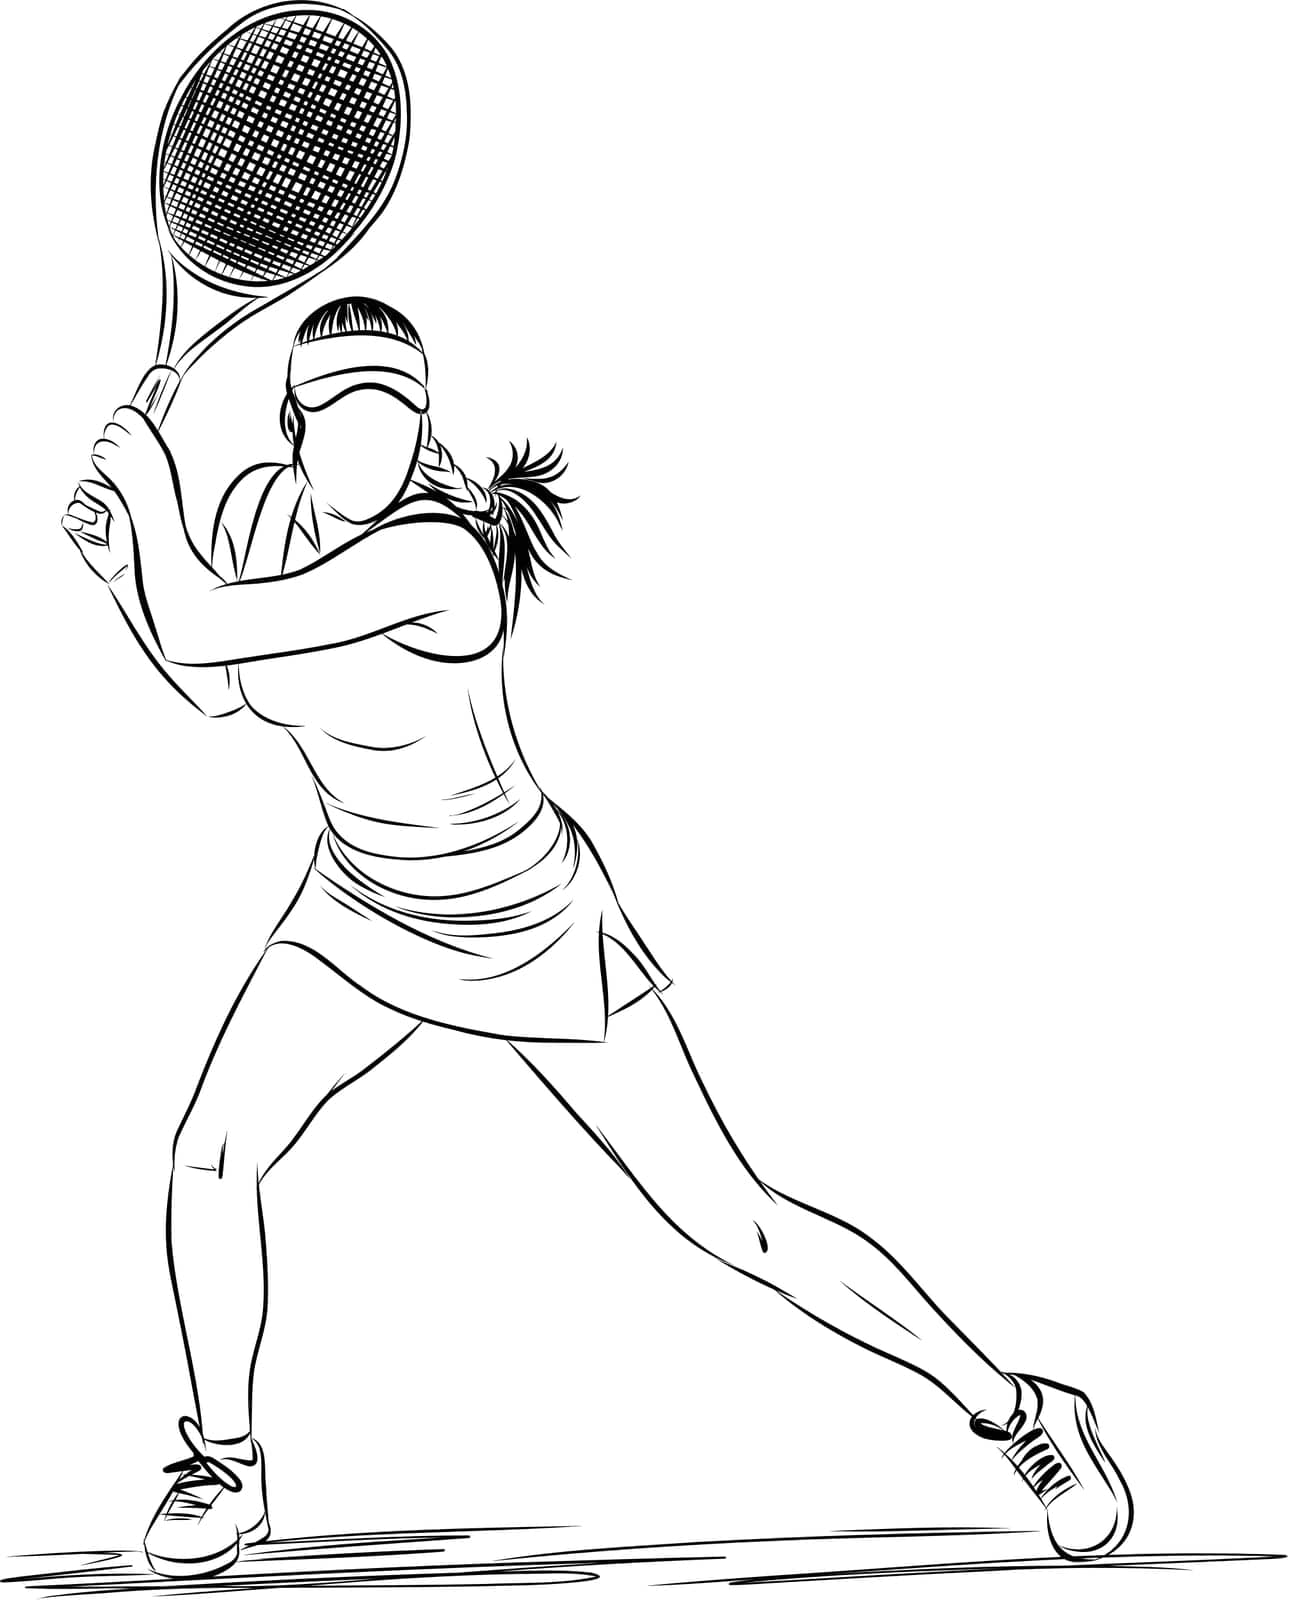 Tennis player hitting a serve. Young tennis player about to hit the ball